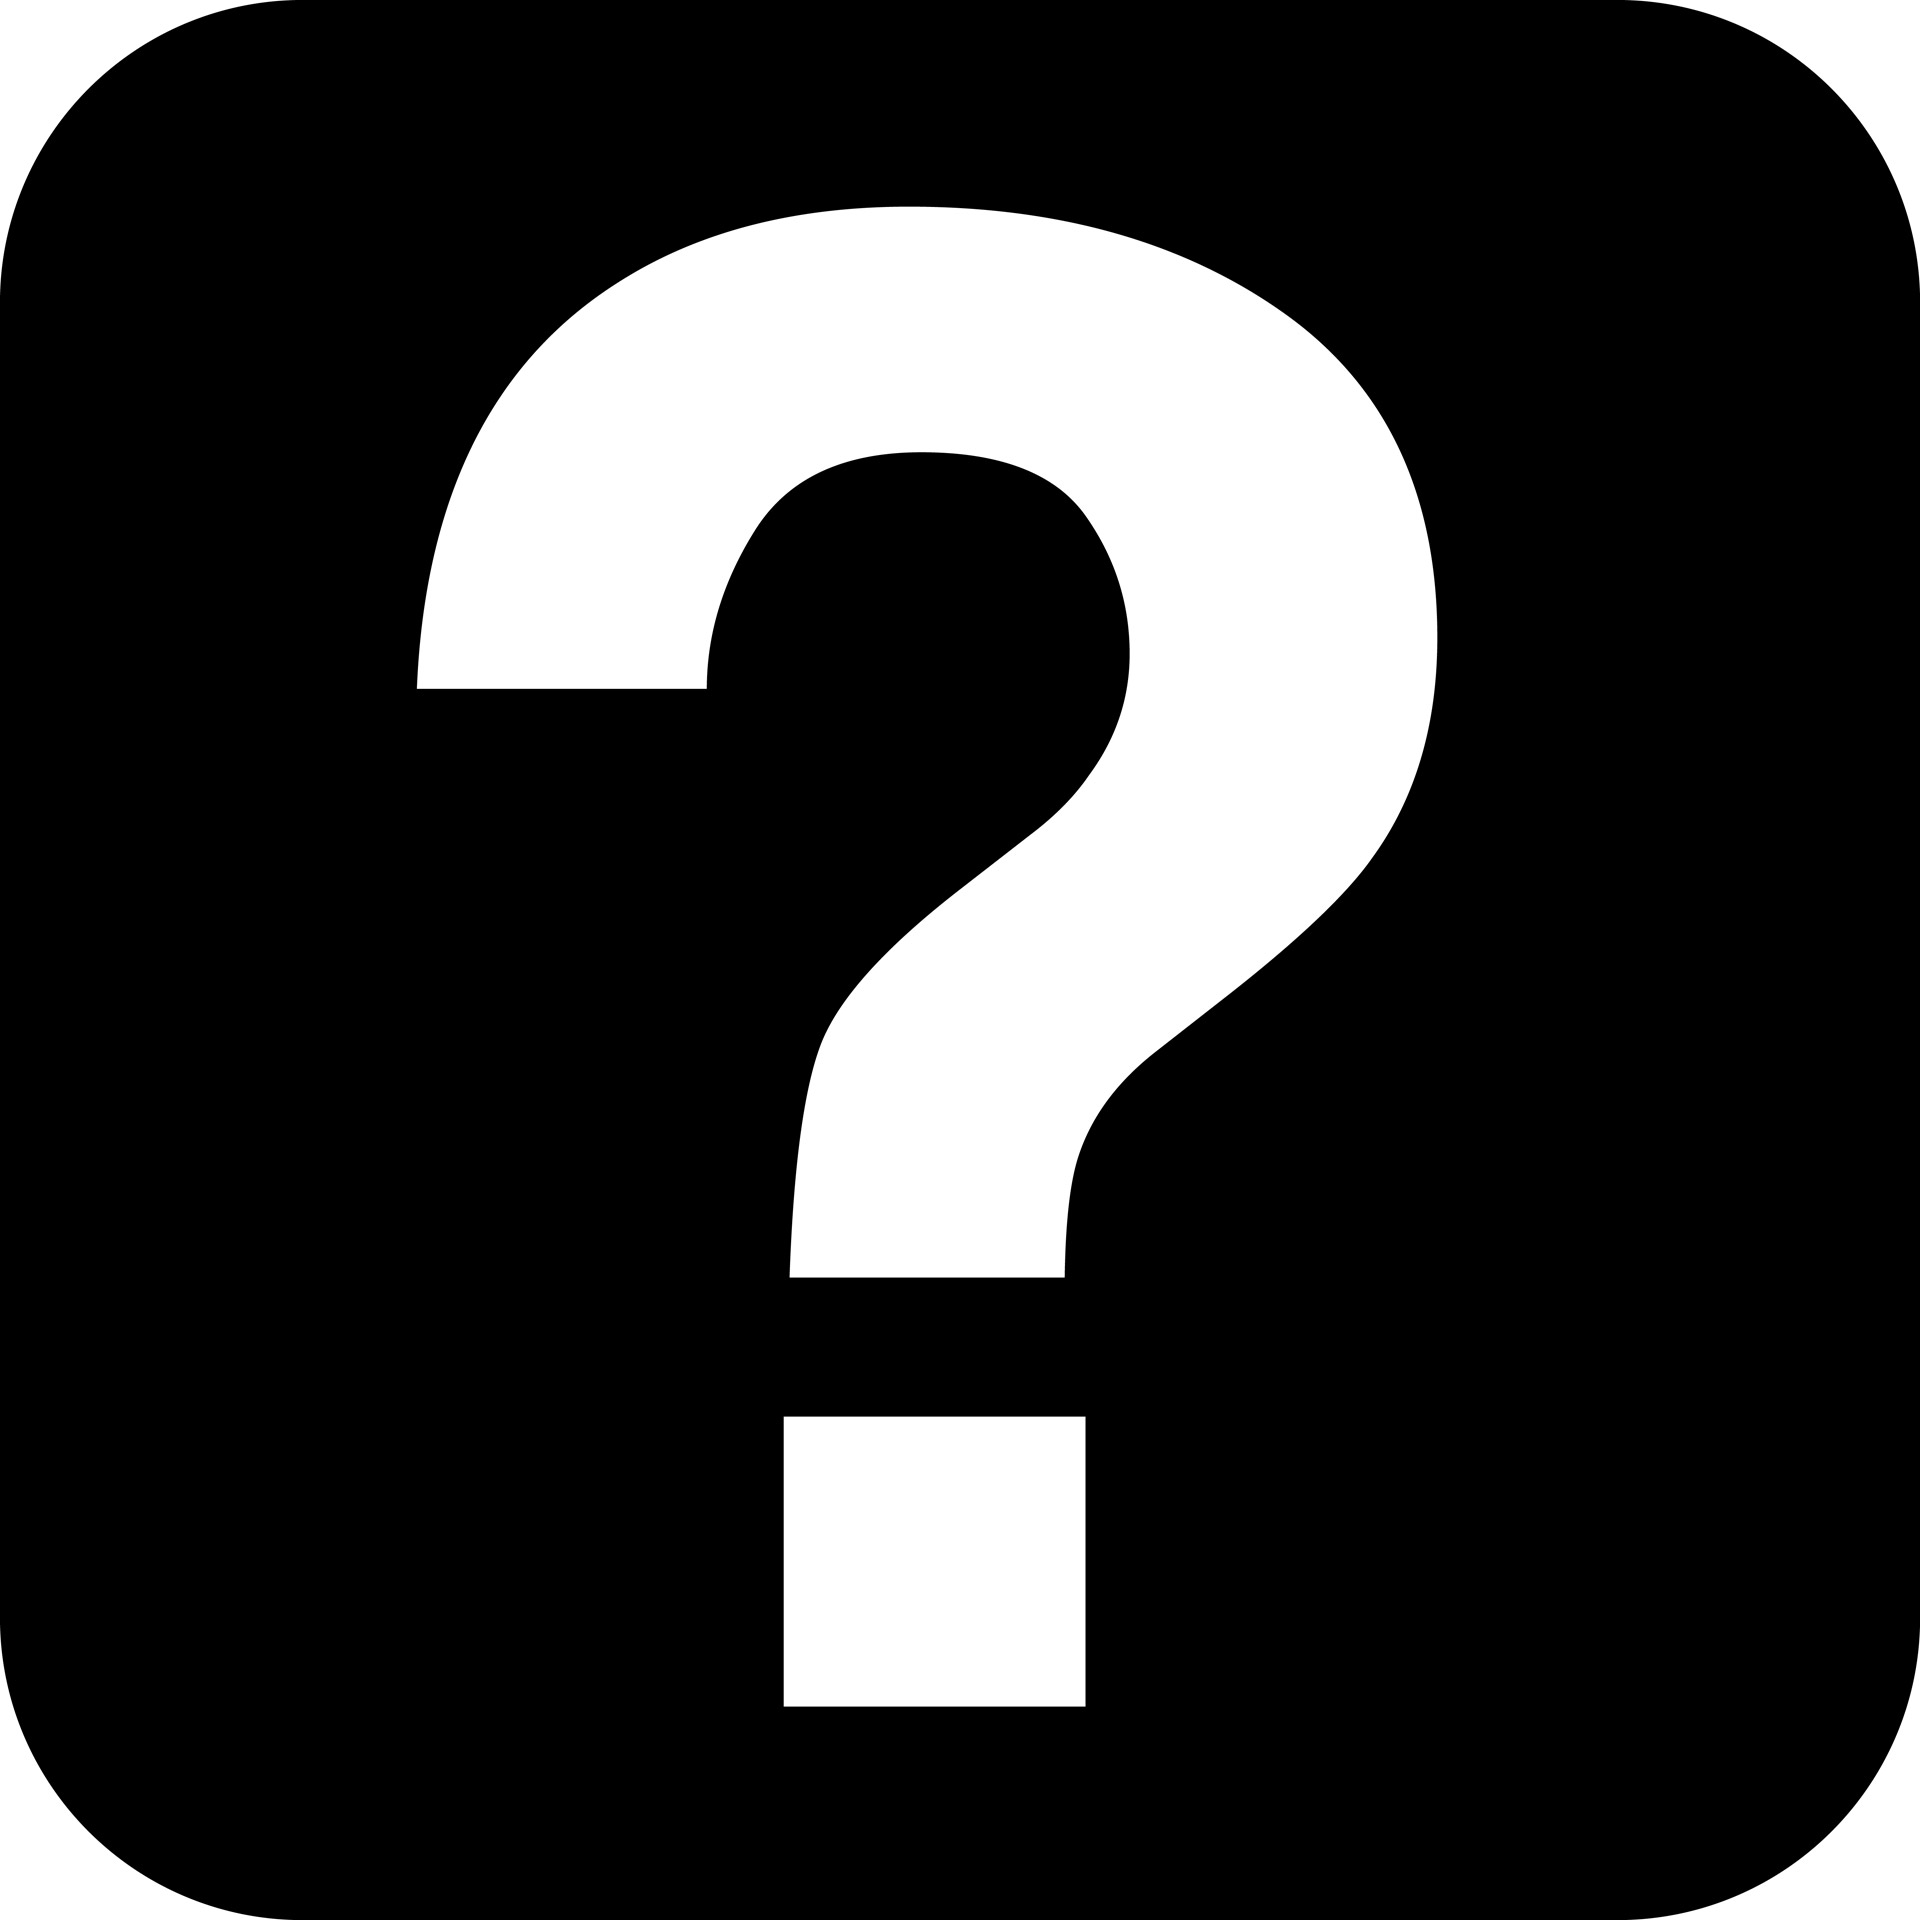 Image result for question mark